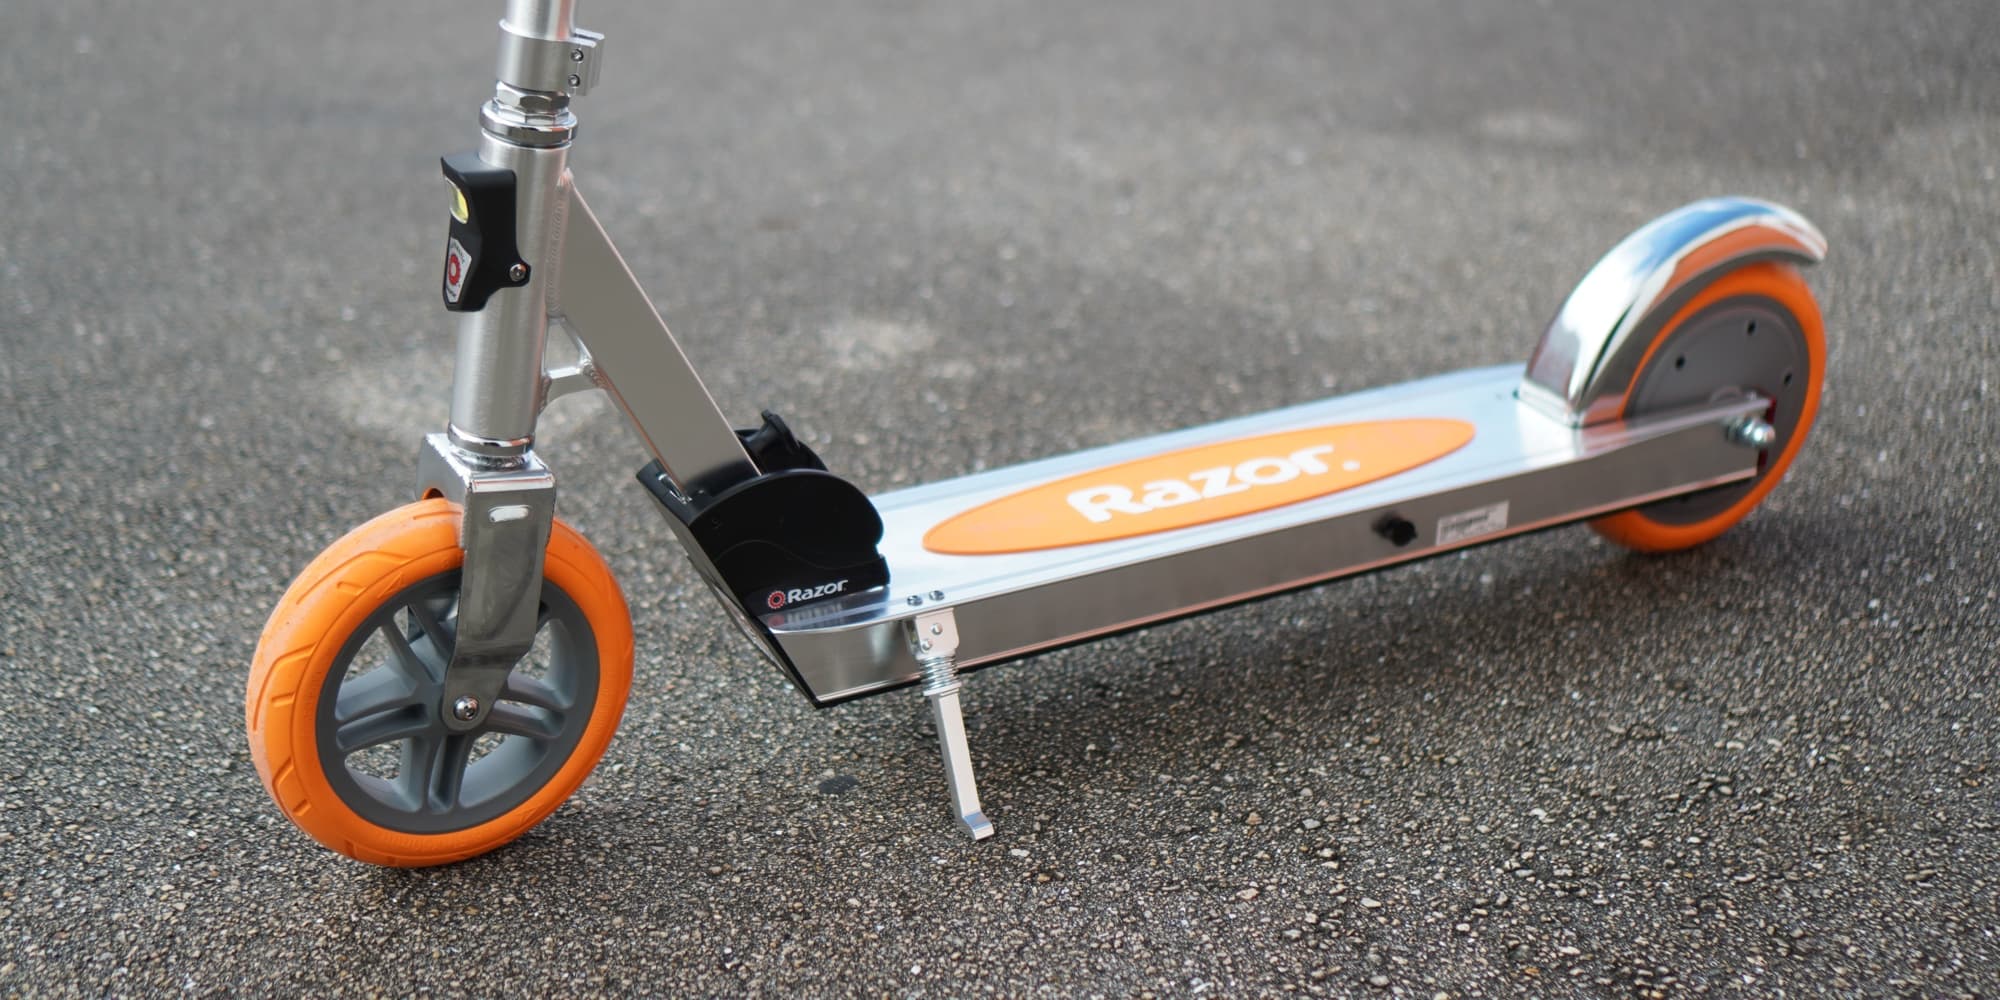 Review: Razor electric scooter is a budget-priced nostalgic ride